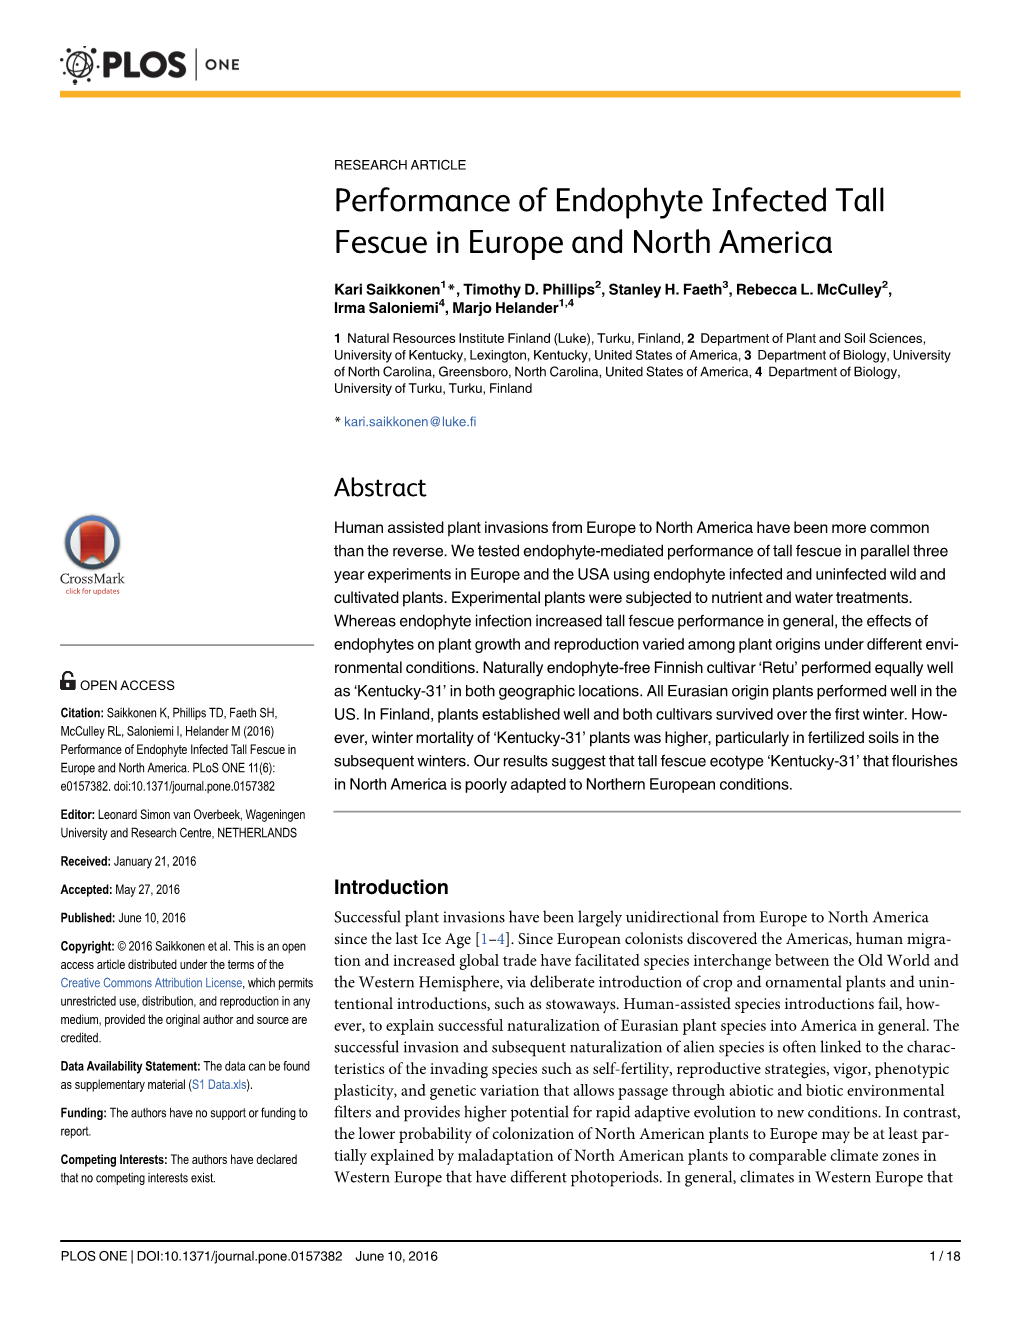 Performance of Endophyte Infected Tall Fescue in Europe and North America